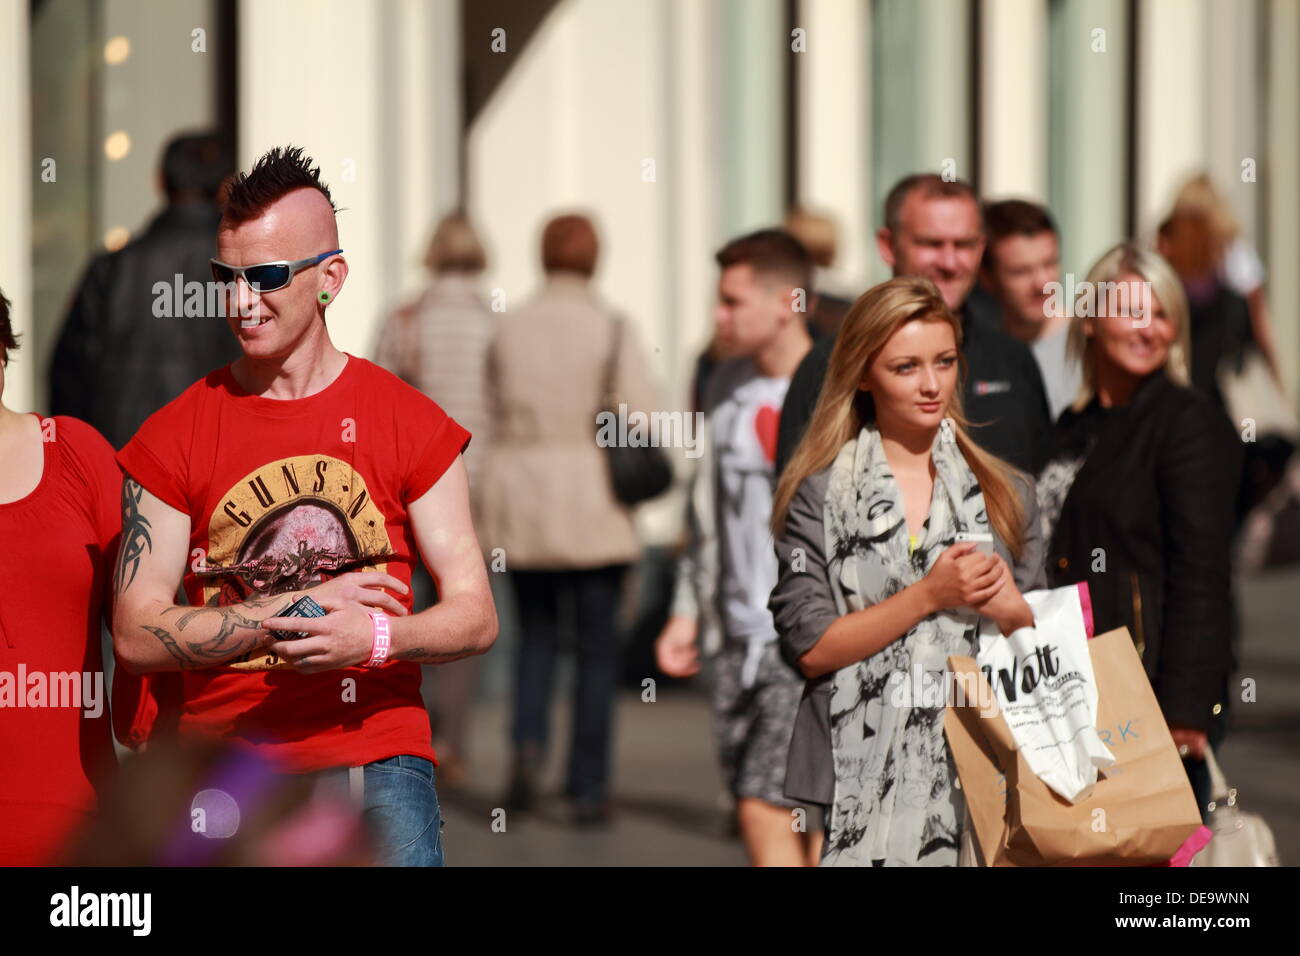 Man with spiky hair wearing sunglasses and sleeveless shirt and a woman with blonde hair watching buskers in Glasgow, Scotland, UK Stock Photo